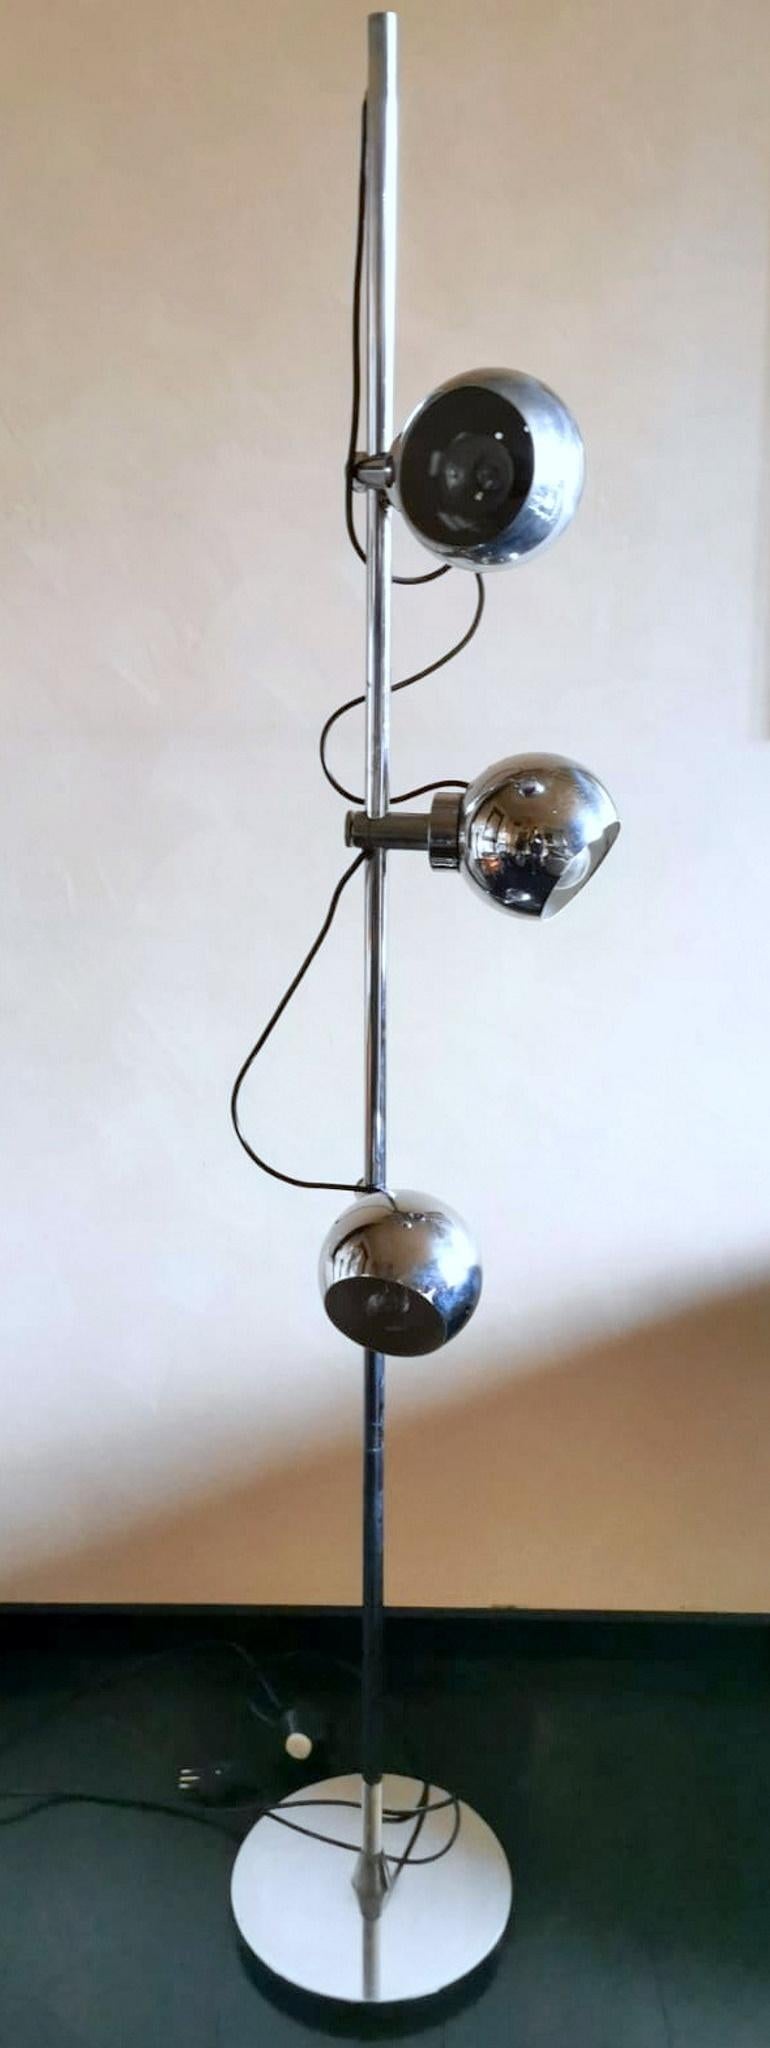 We kindly suggest you read the whole description, because with it we try to give you detailed technical and historical information to guarantee the authenticity of our objects.
Floor lamp in Space Age style; it is composed of a high chromed metal